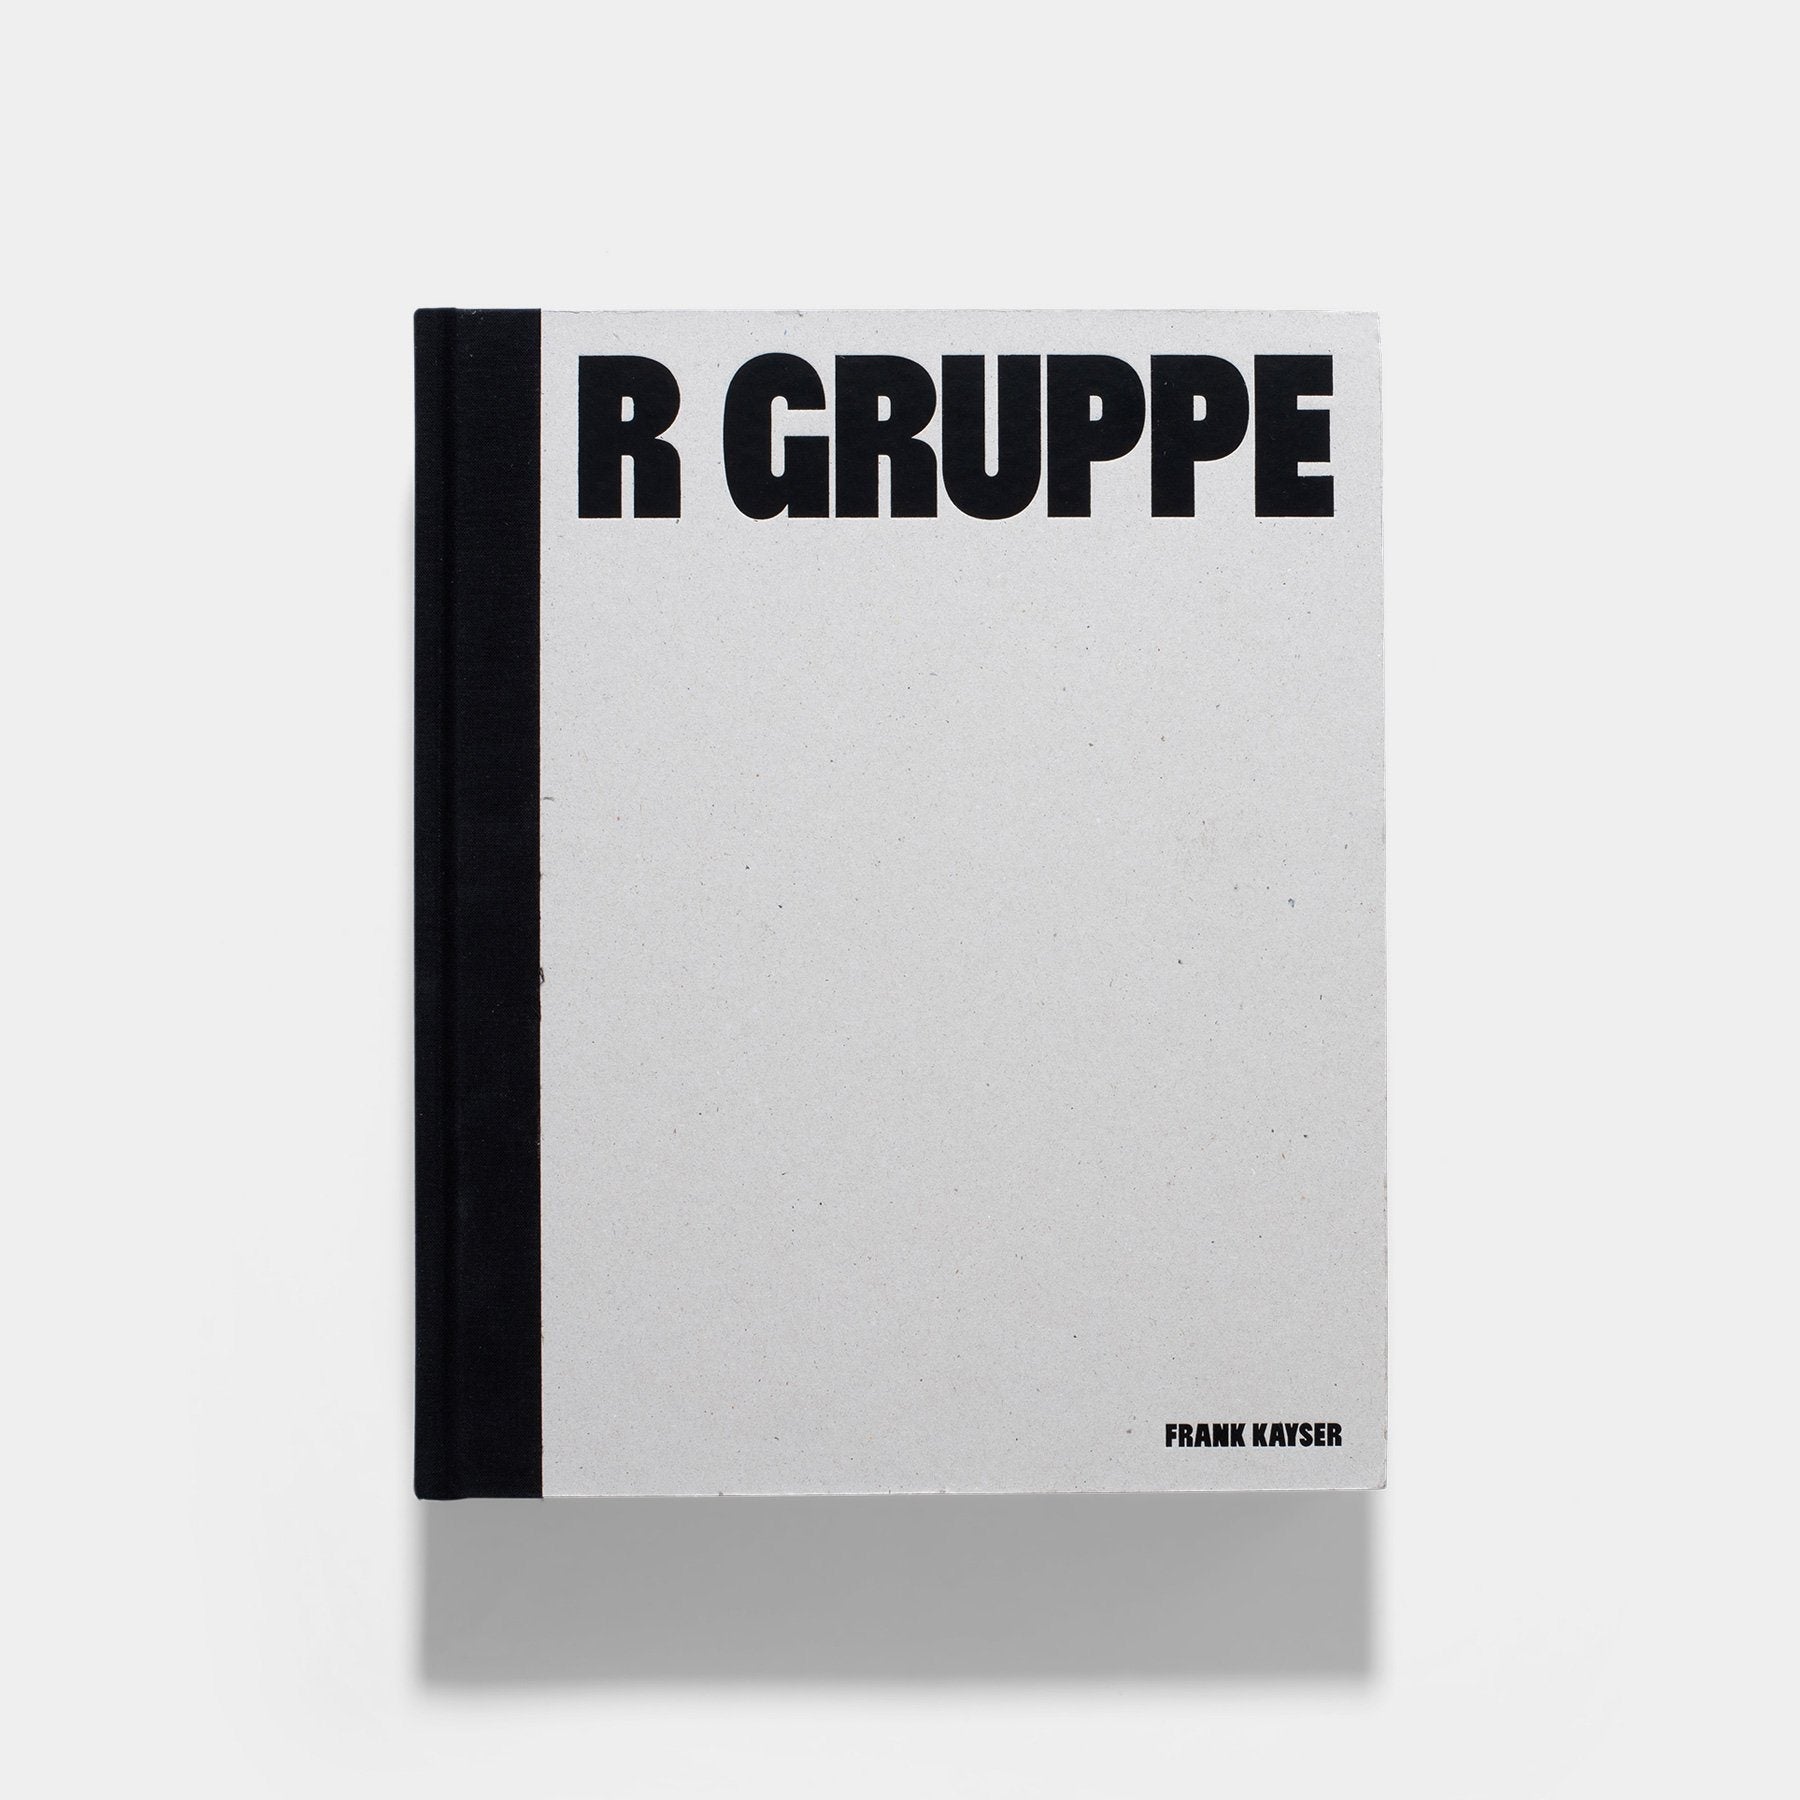 The R-Gruppe Book - A Porsche Lover Must Have